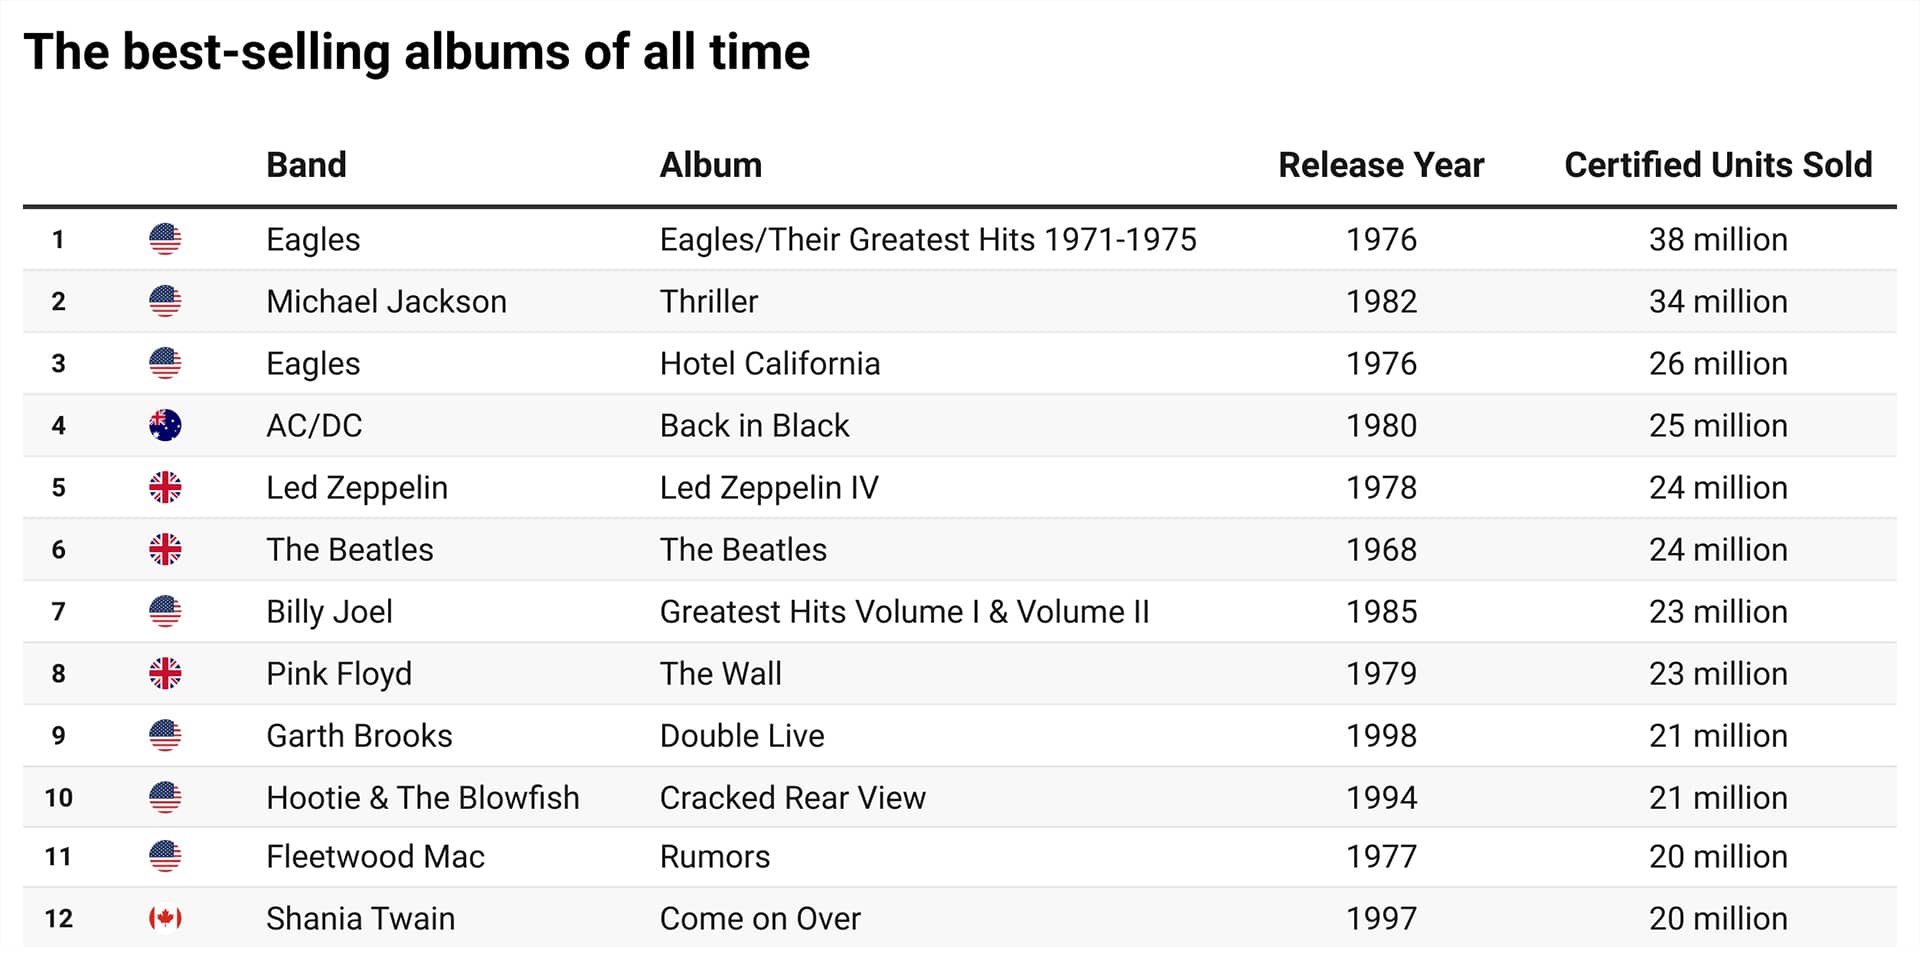 What Are The Best-Selling Albums of All Time?